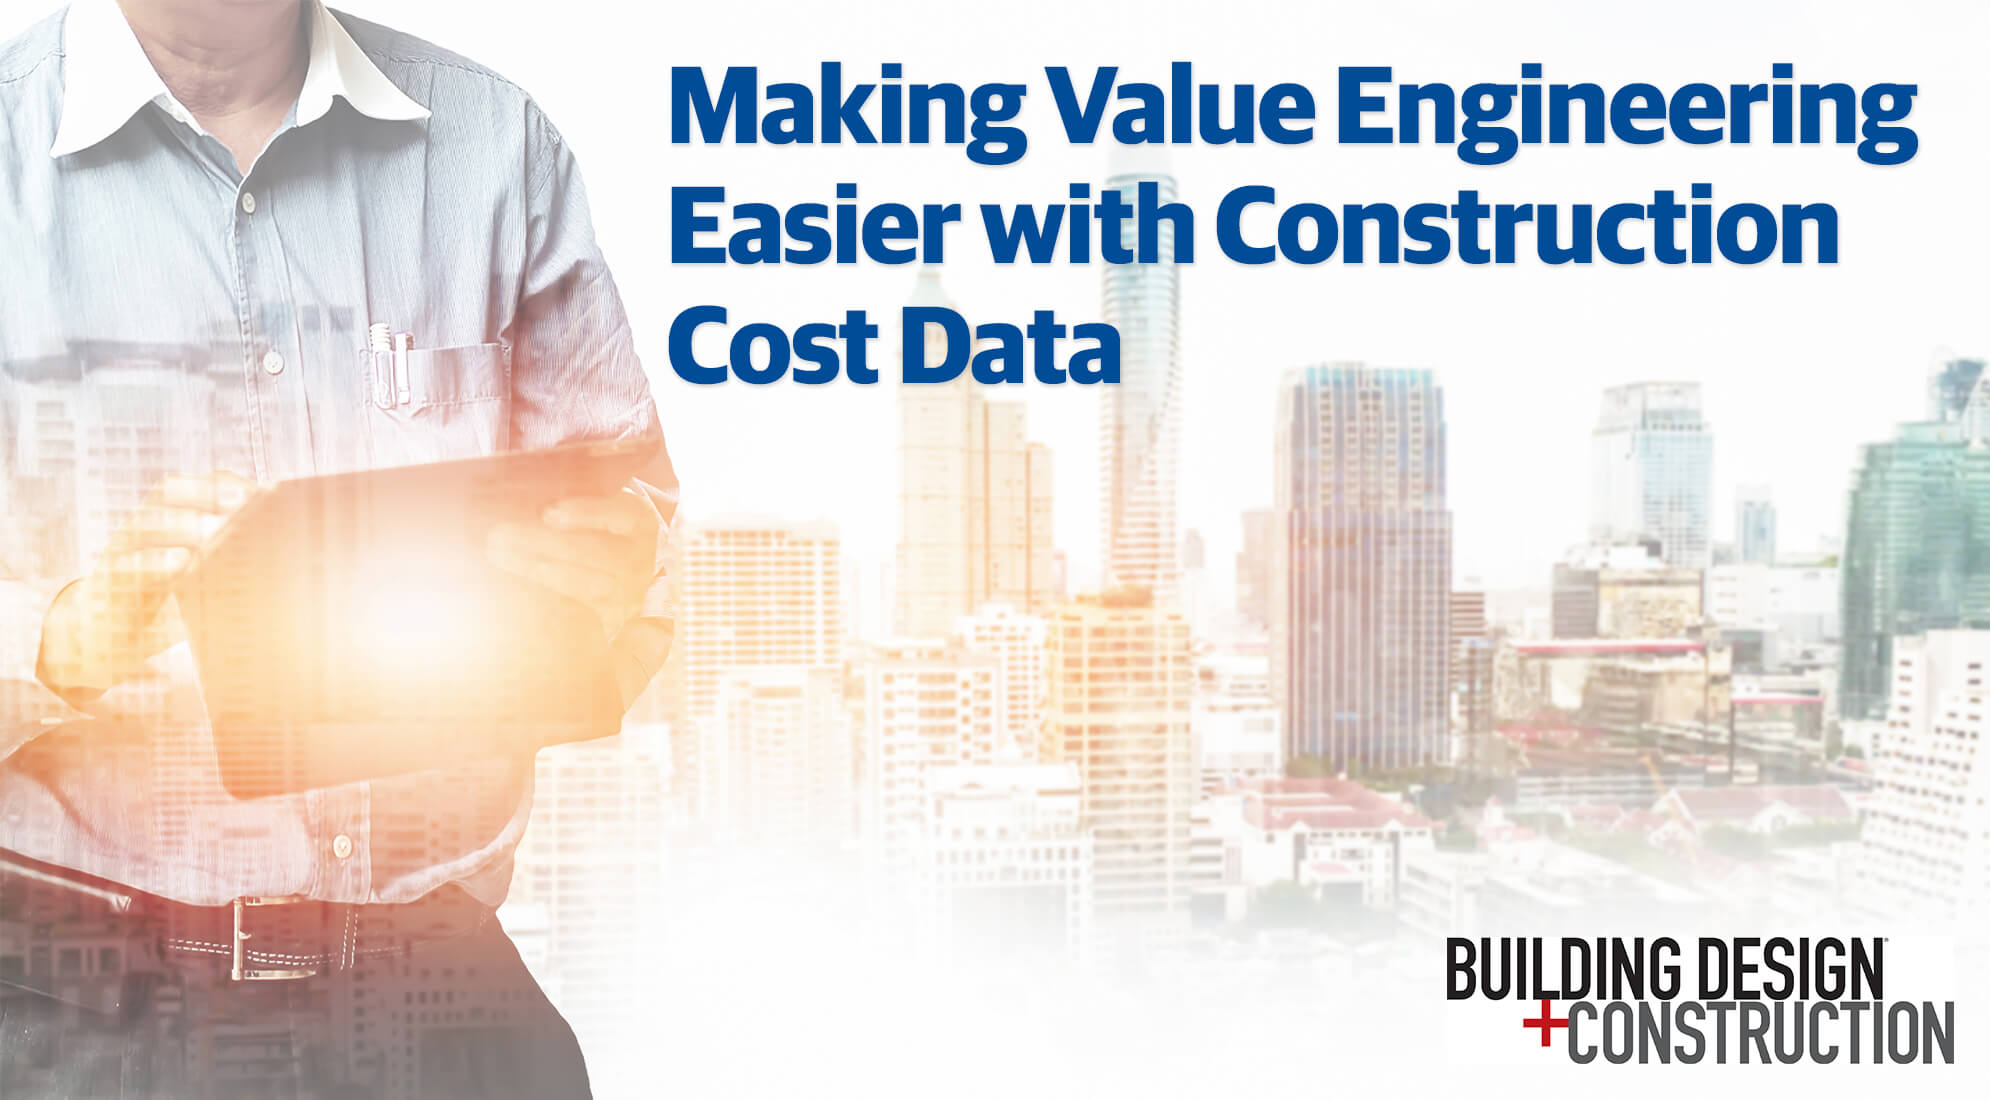 Making Value Engineering Easier with Construction Cost Data 5